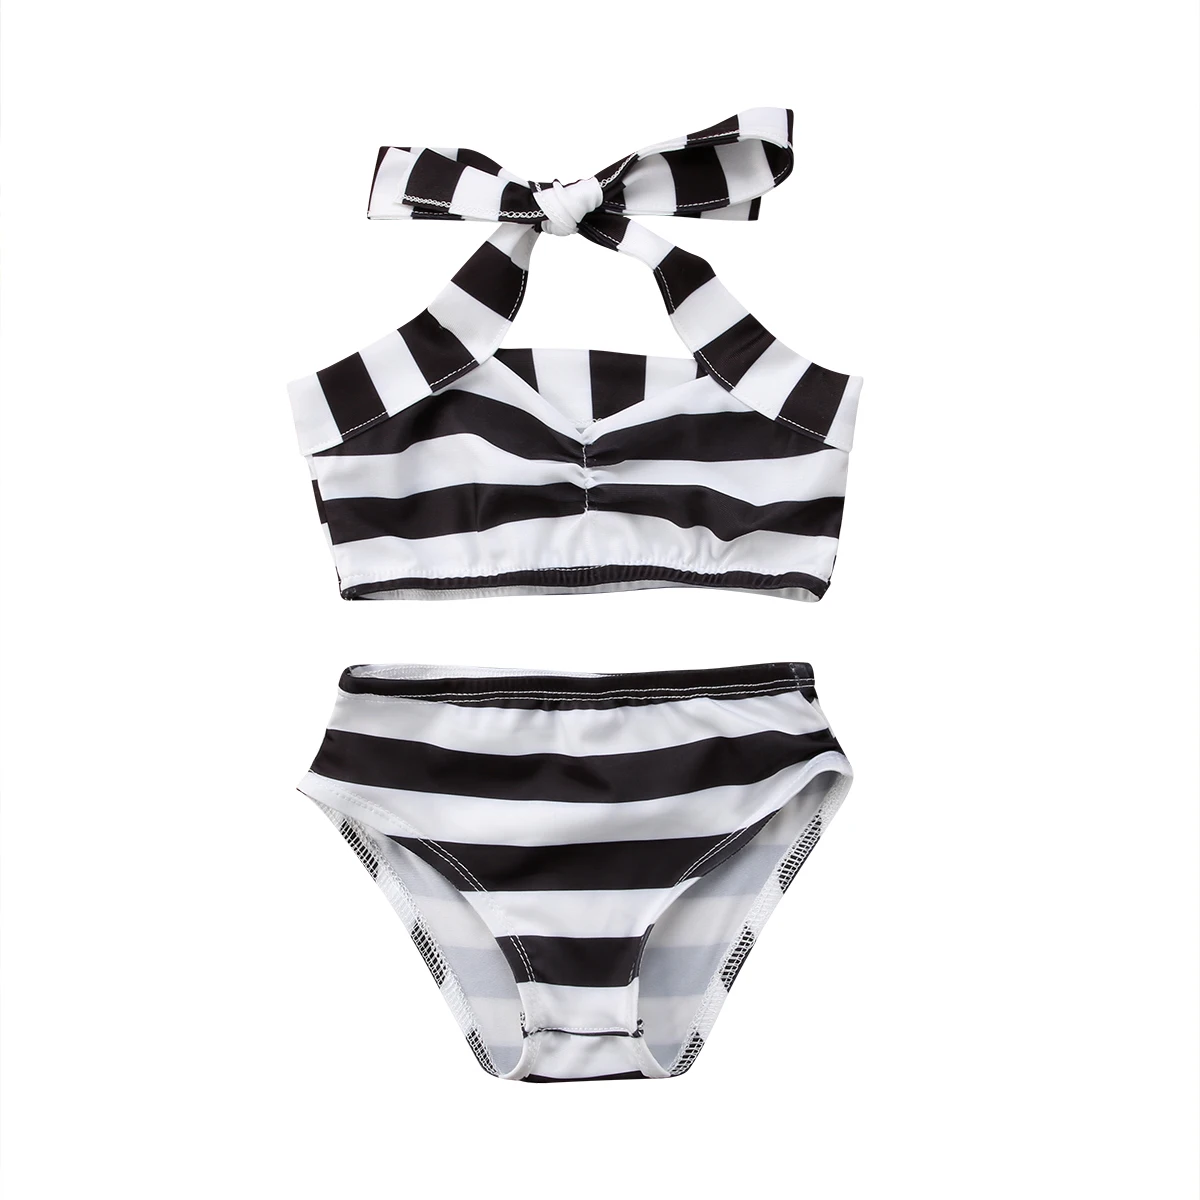 

Toddle Kids Baby Girls Clothes Stripe Swimwear Swimsuit Bathing Suit Beachwear 2Ppcs Blackless Swimsuits Summer Outfits 0-3T